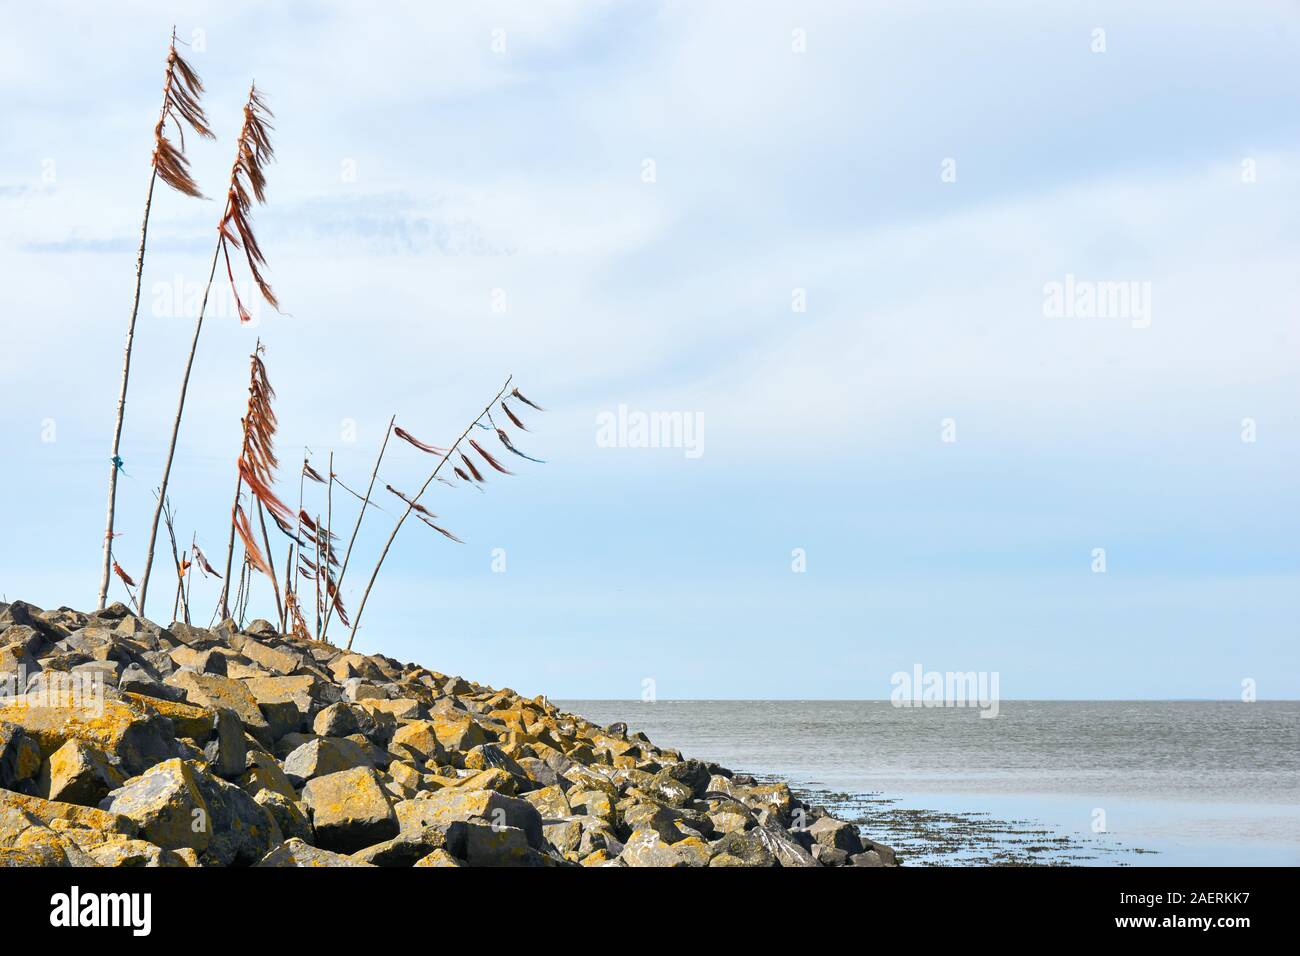 Poles with colored rope and plastic waving in the wind on breakwater or pier in the Wadden Sea near the entrance to the port of Harlingen. Stock Photo